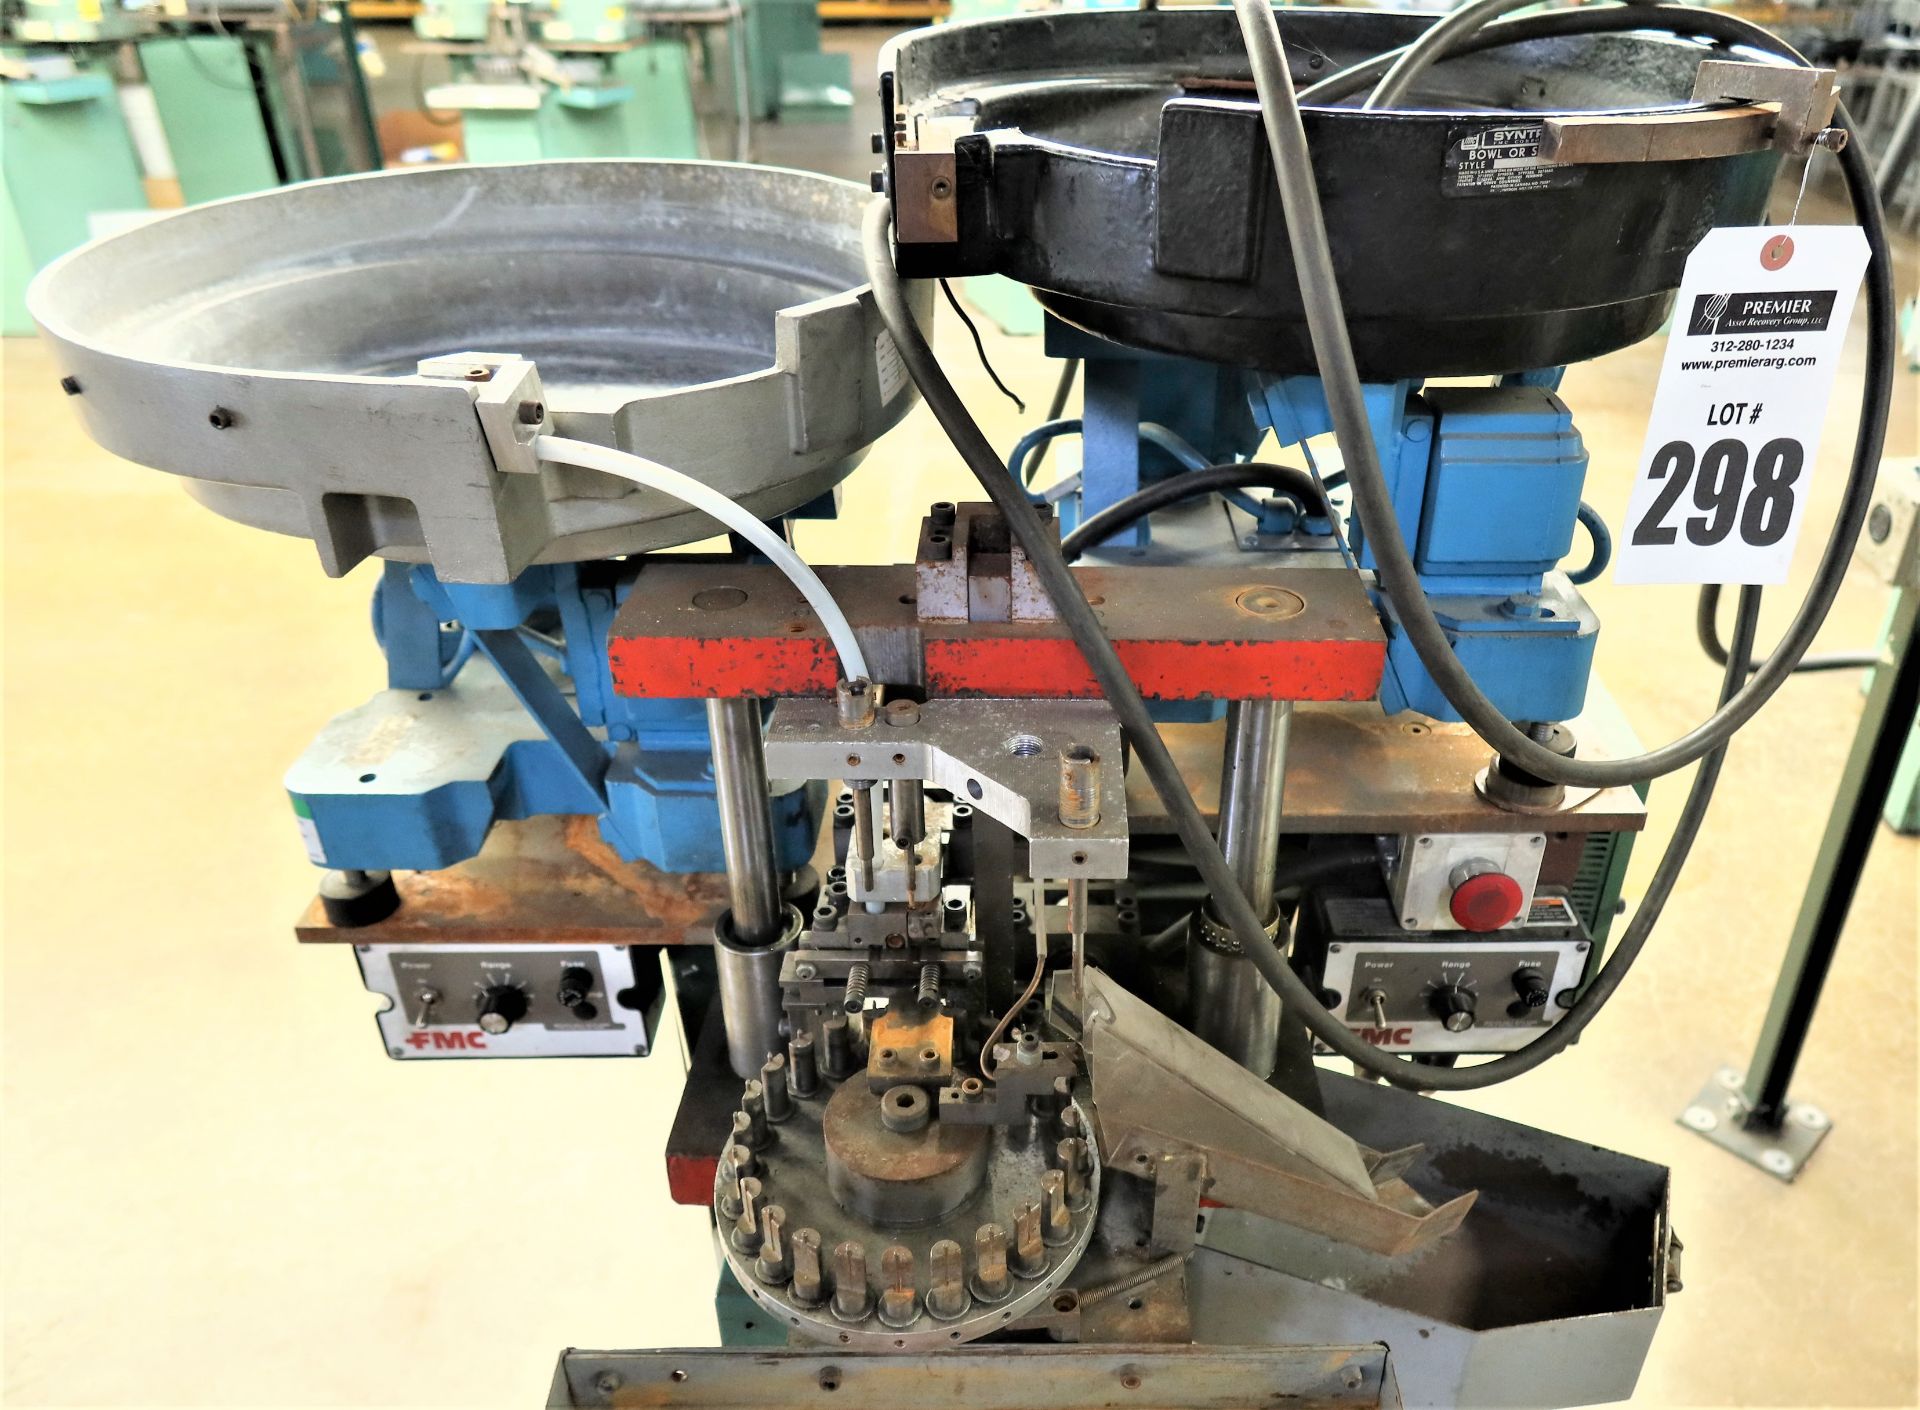 Automated Terminal Connector Assembly Machine with Vibratory Bowl Feeder - Image 2 of 5